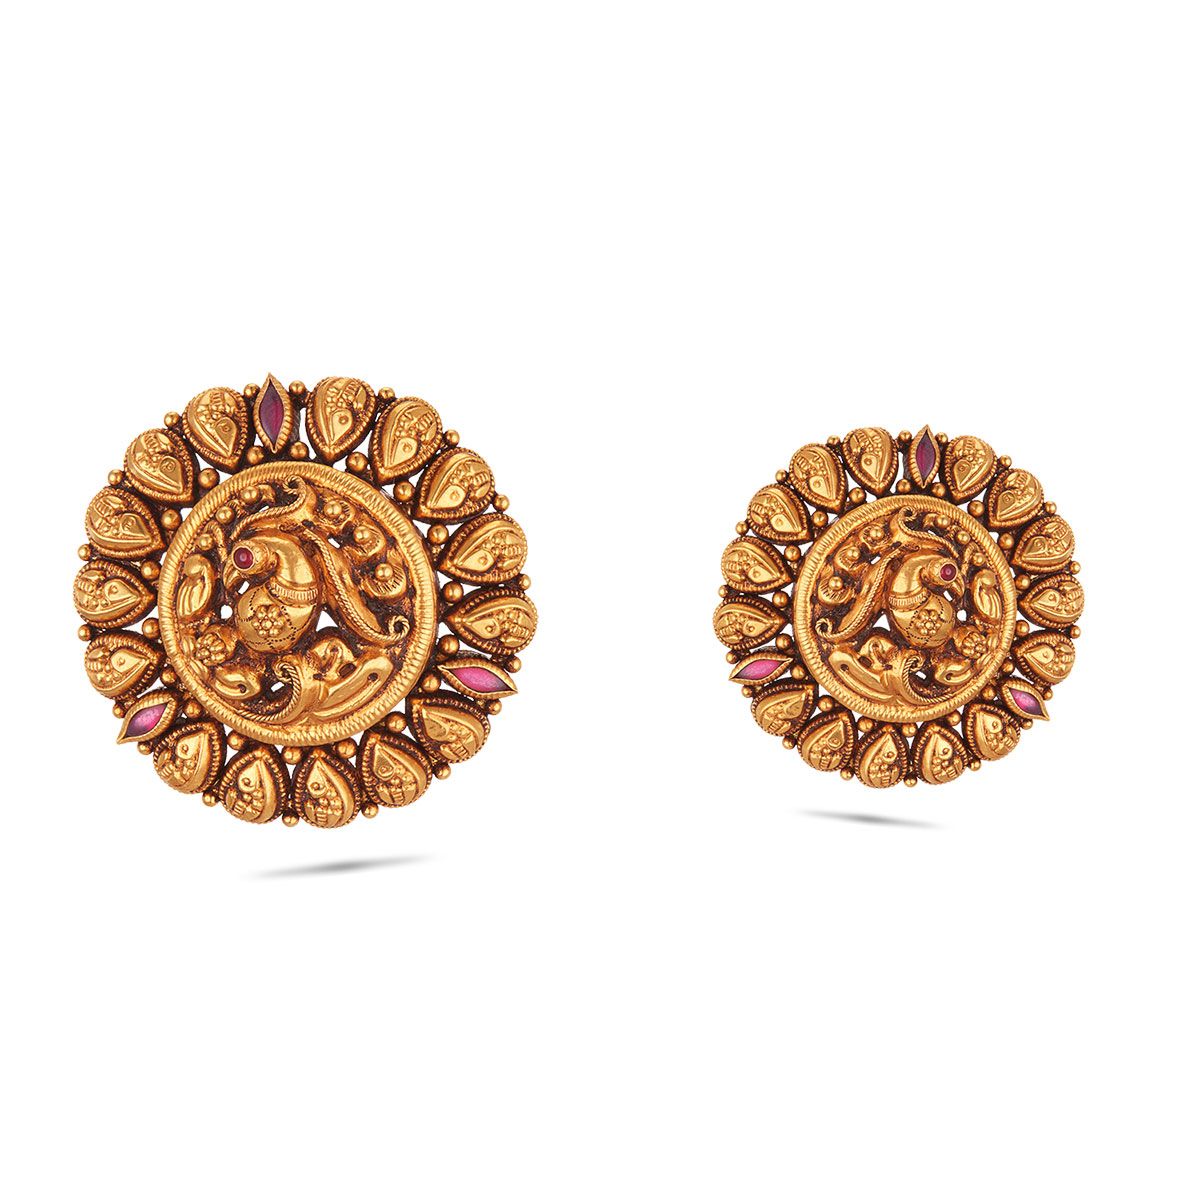 Antique golden earings Price : 650/- Dc : 200/- For orders dm or whatsapp  us at +923035335339 #earrings #earing #antique #jewelry… | Instagram